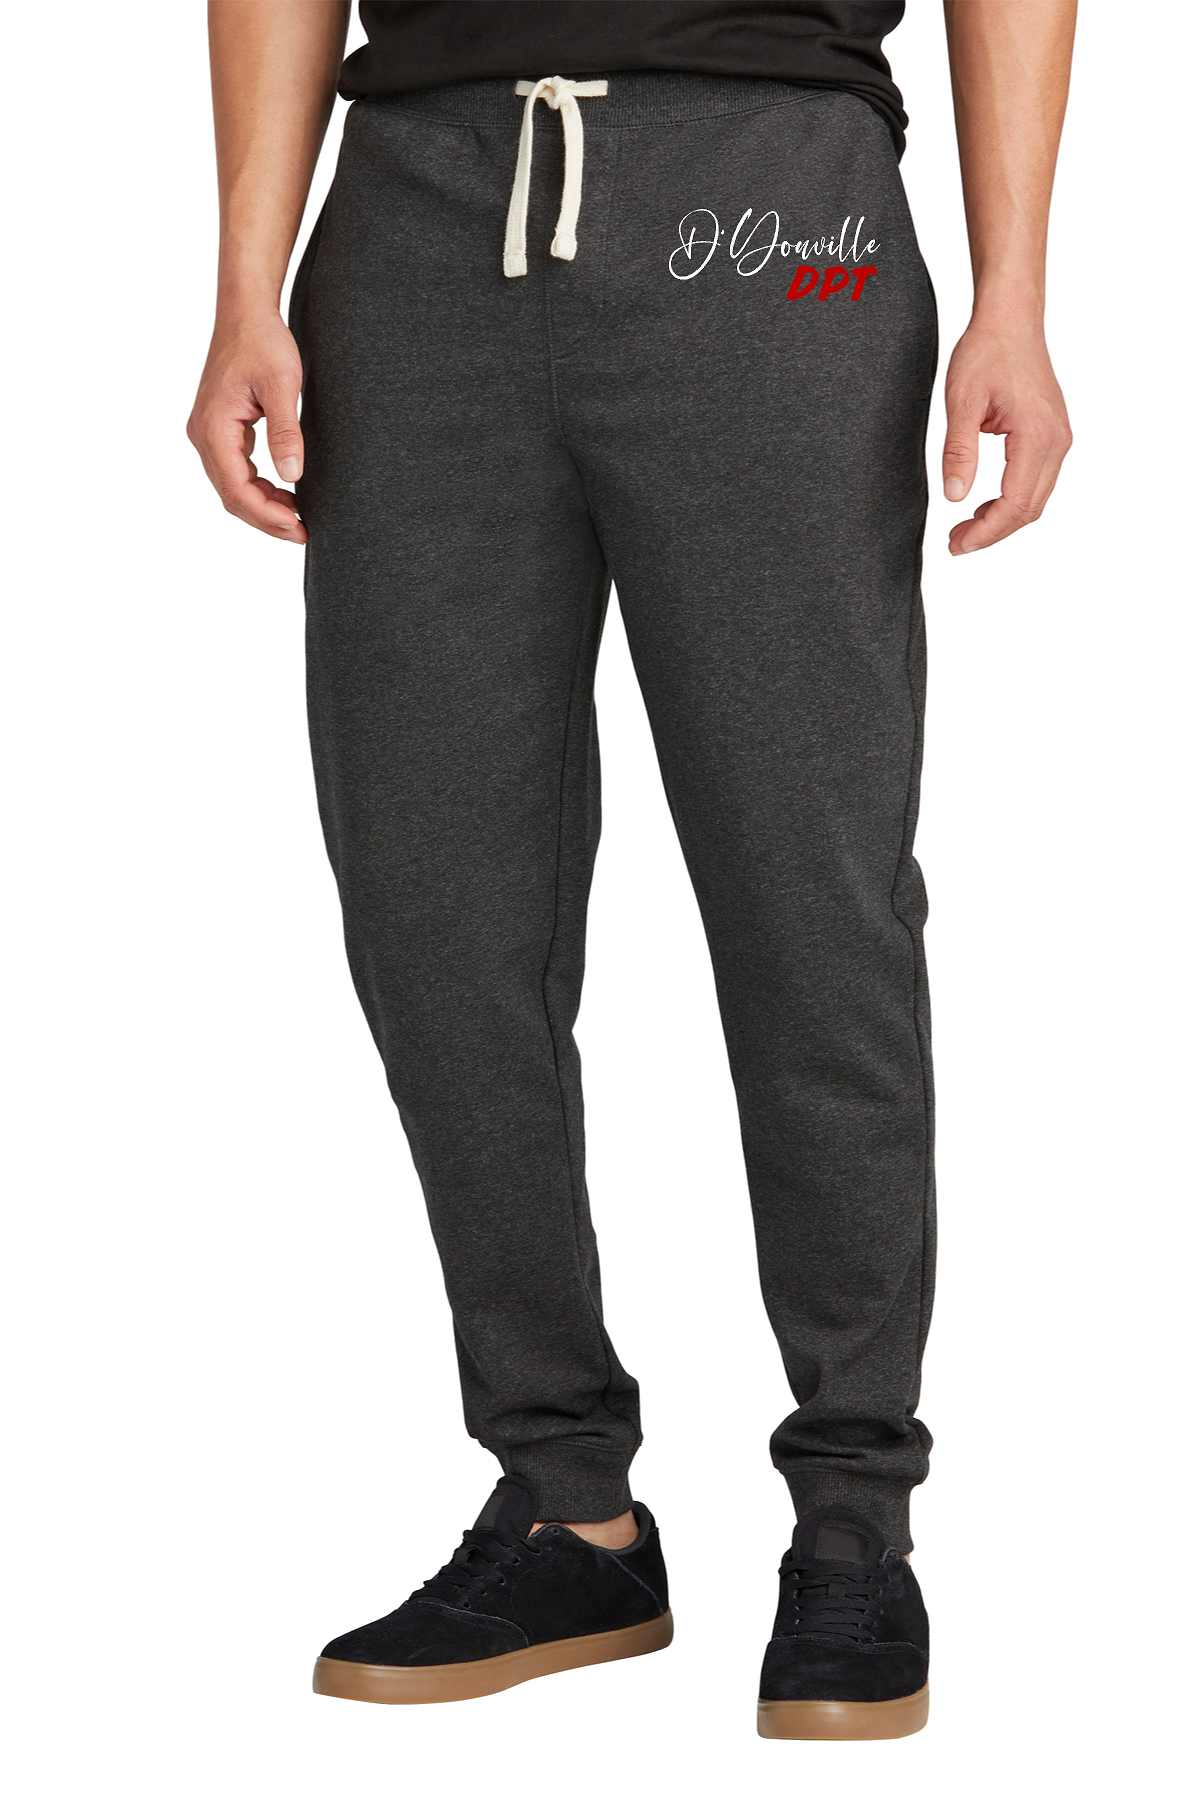 D'Youville Physical Therapy DT8107 District® Re-Fleece™ Jogger